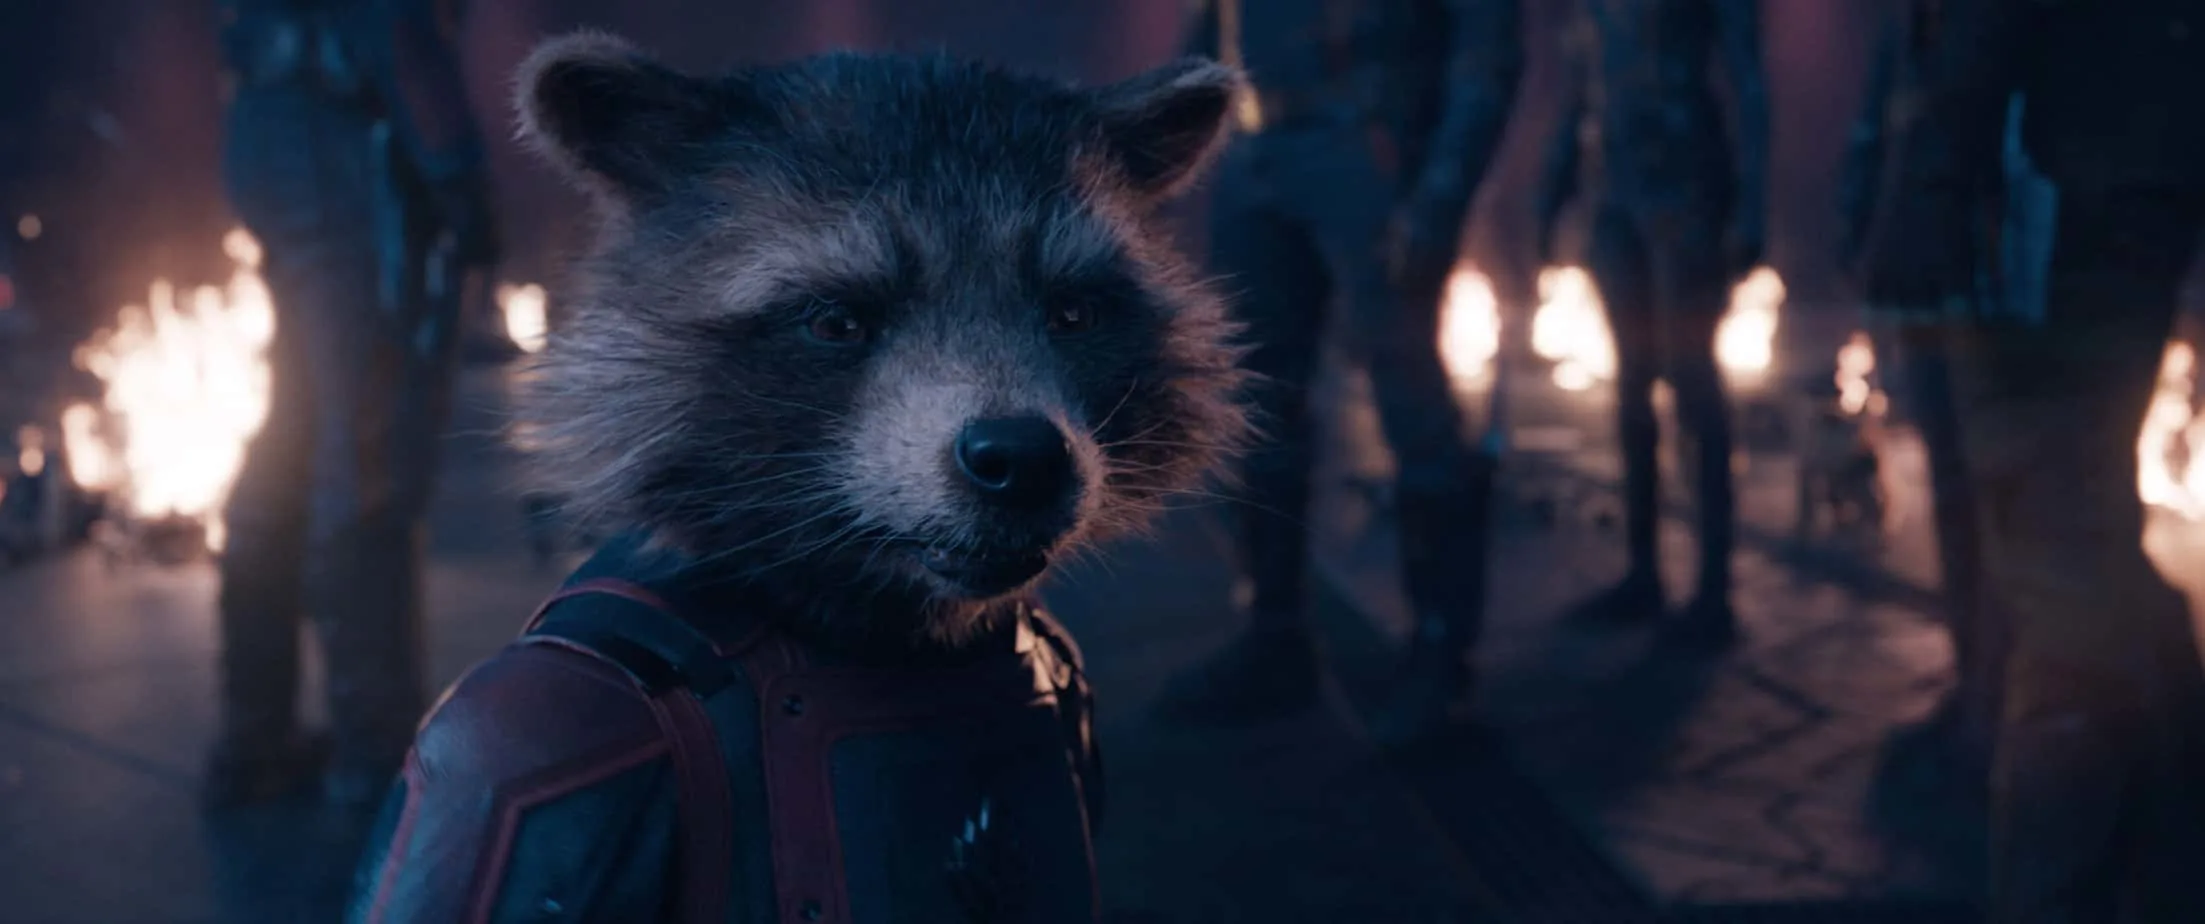 Rocket (voiced by Bradley Cooper) in Marvel Studios' Guardians of the Galaxy Vol. 3 movie quotes.